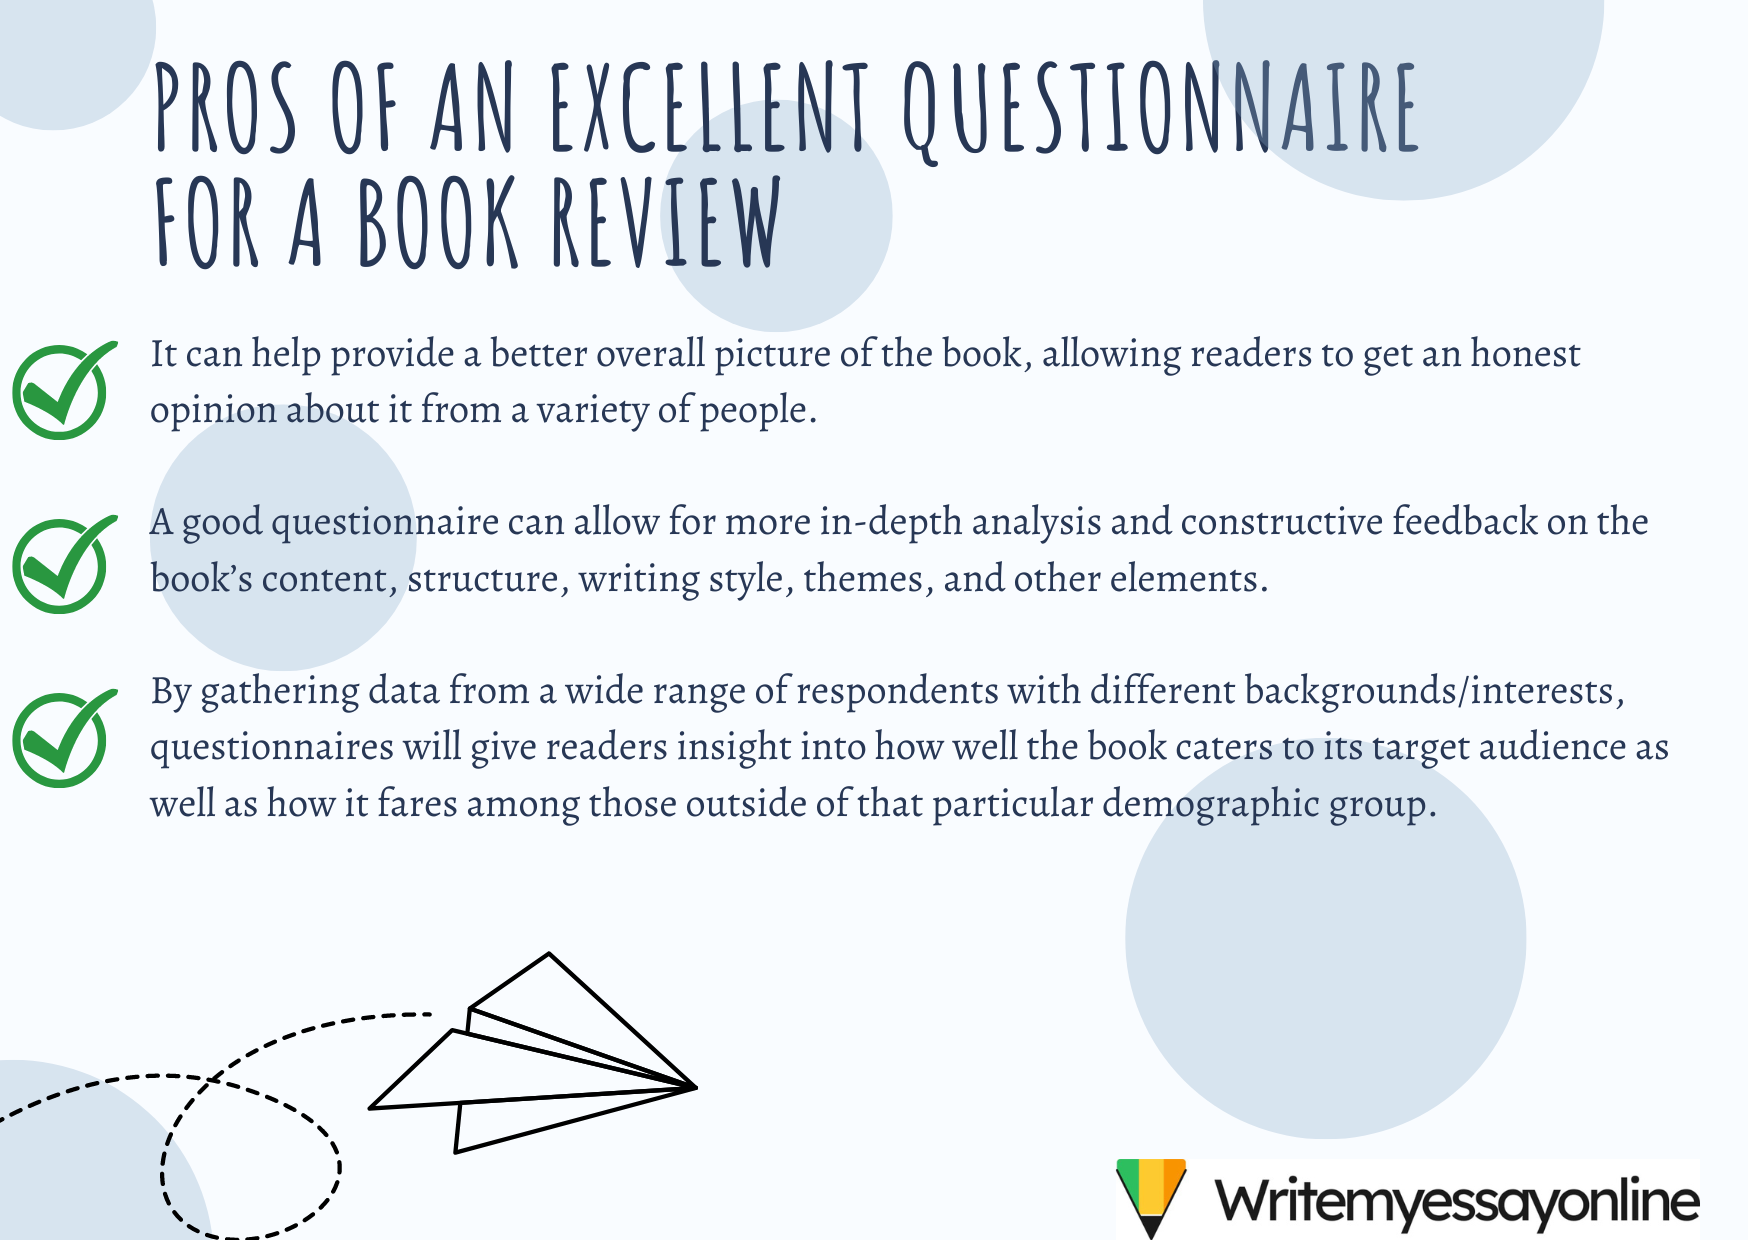 Pros of an Excellent Questionnaire for a Book Review